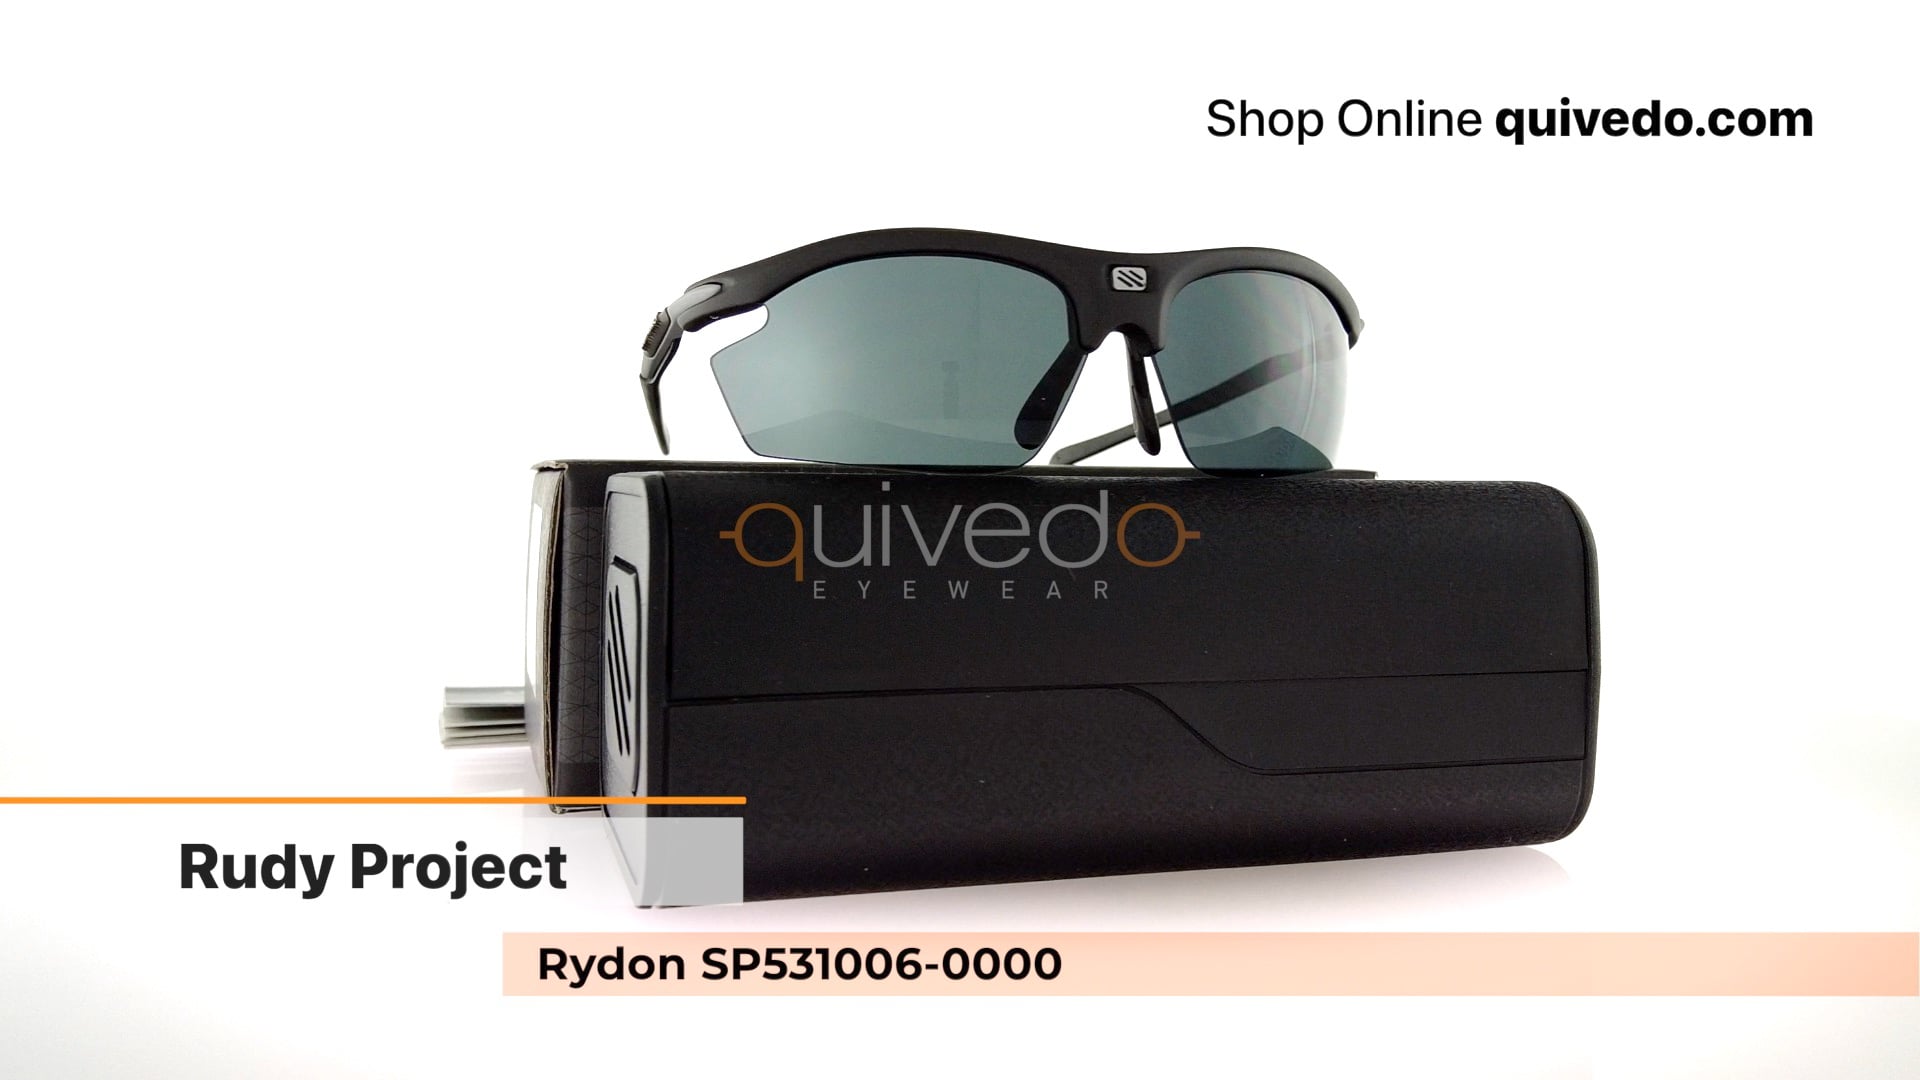 Rudy Project Rydon SP531006-0000